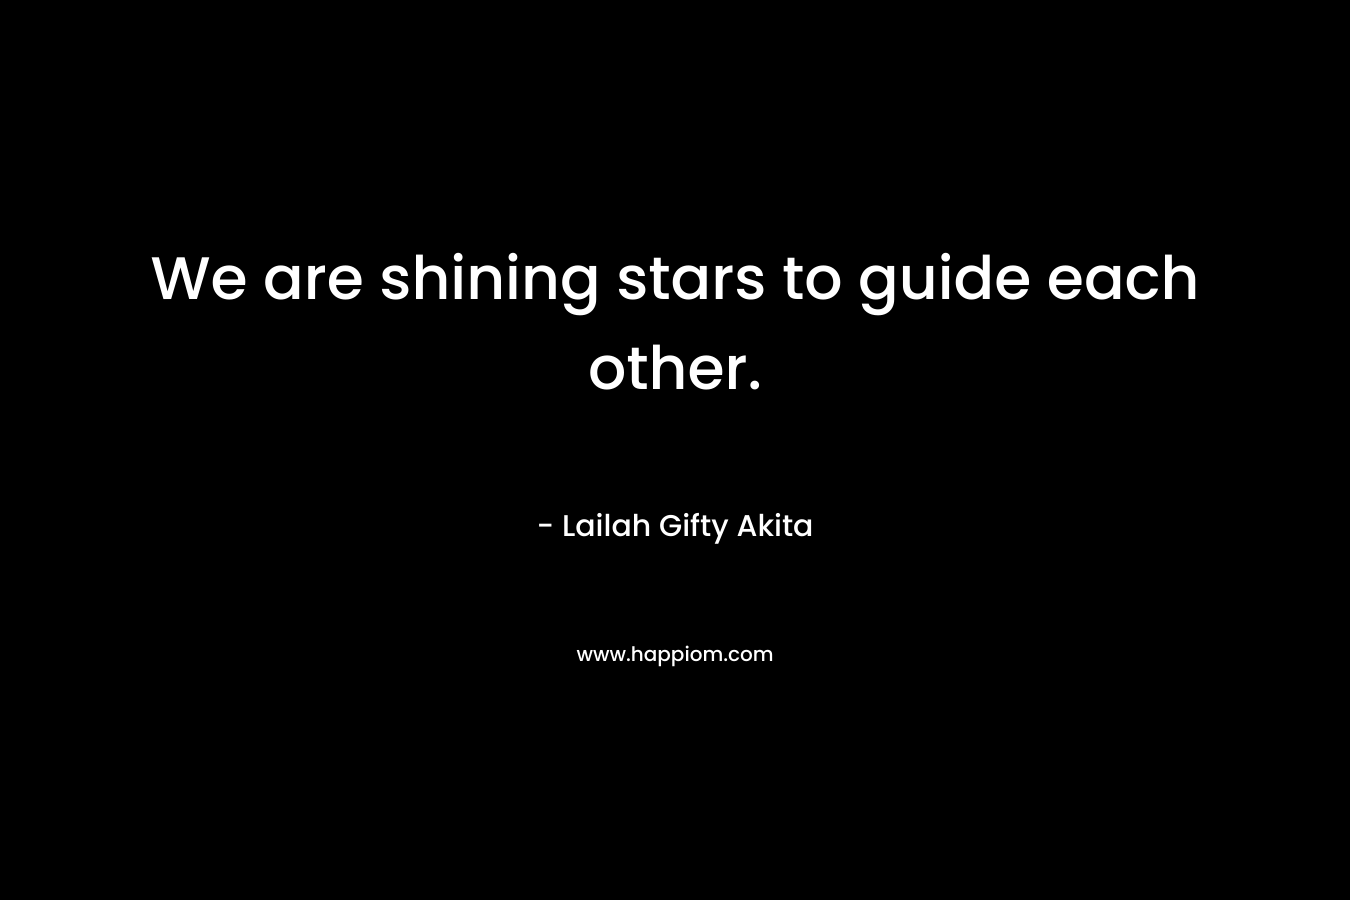 We are shining stars to guide each other.